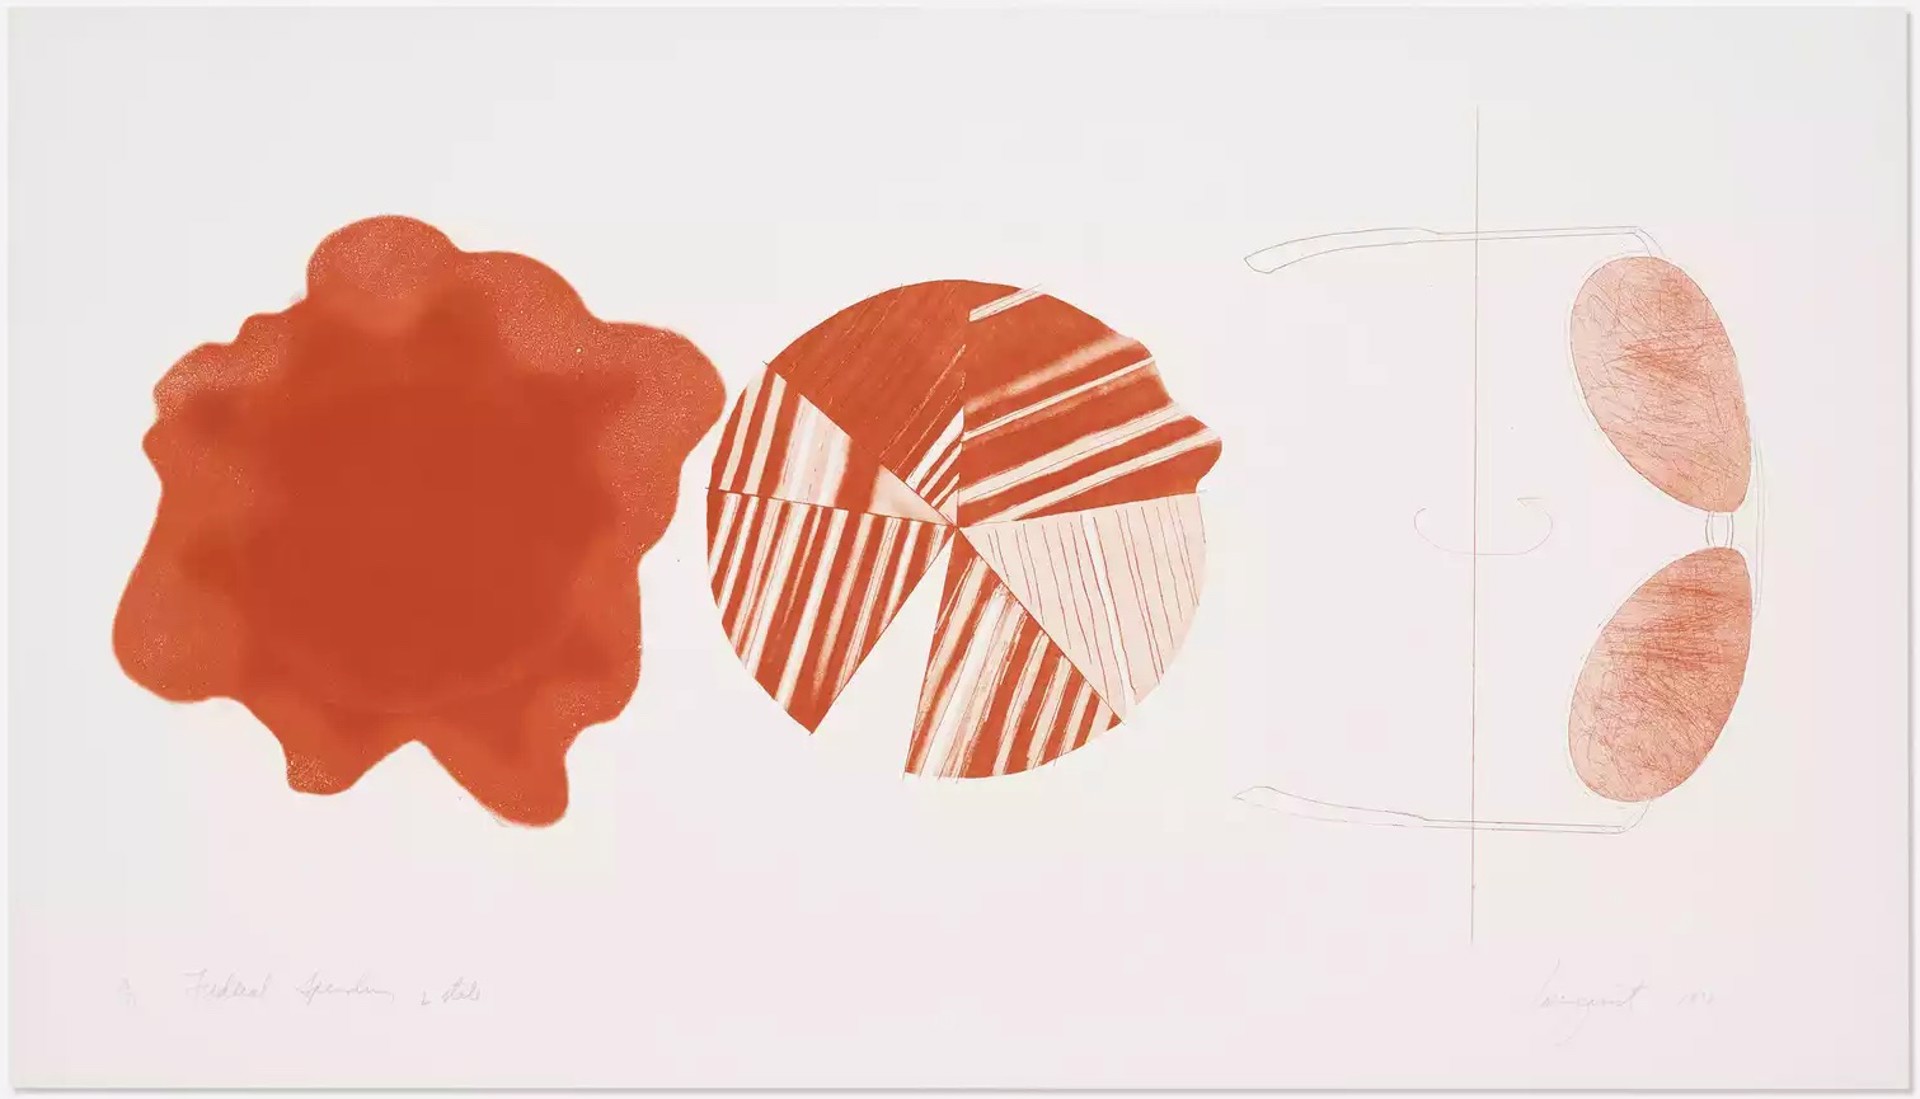 Federal Spending (2nd State) by James Rosenquist